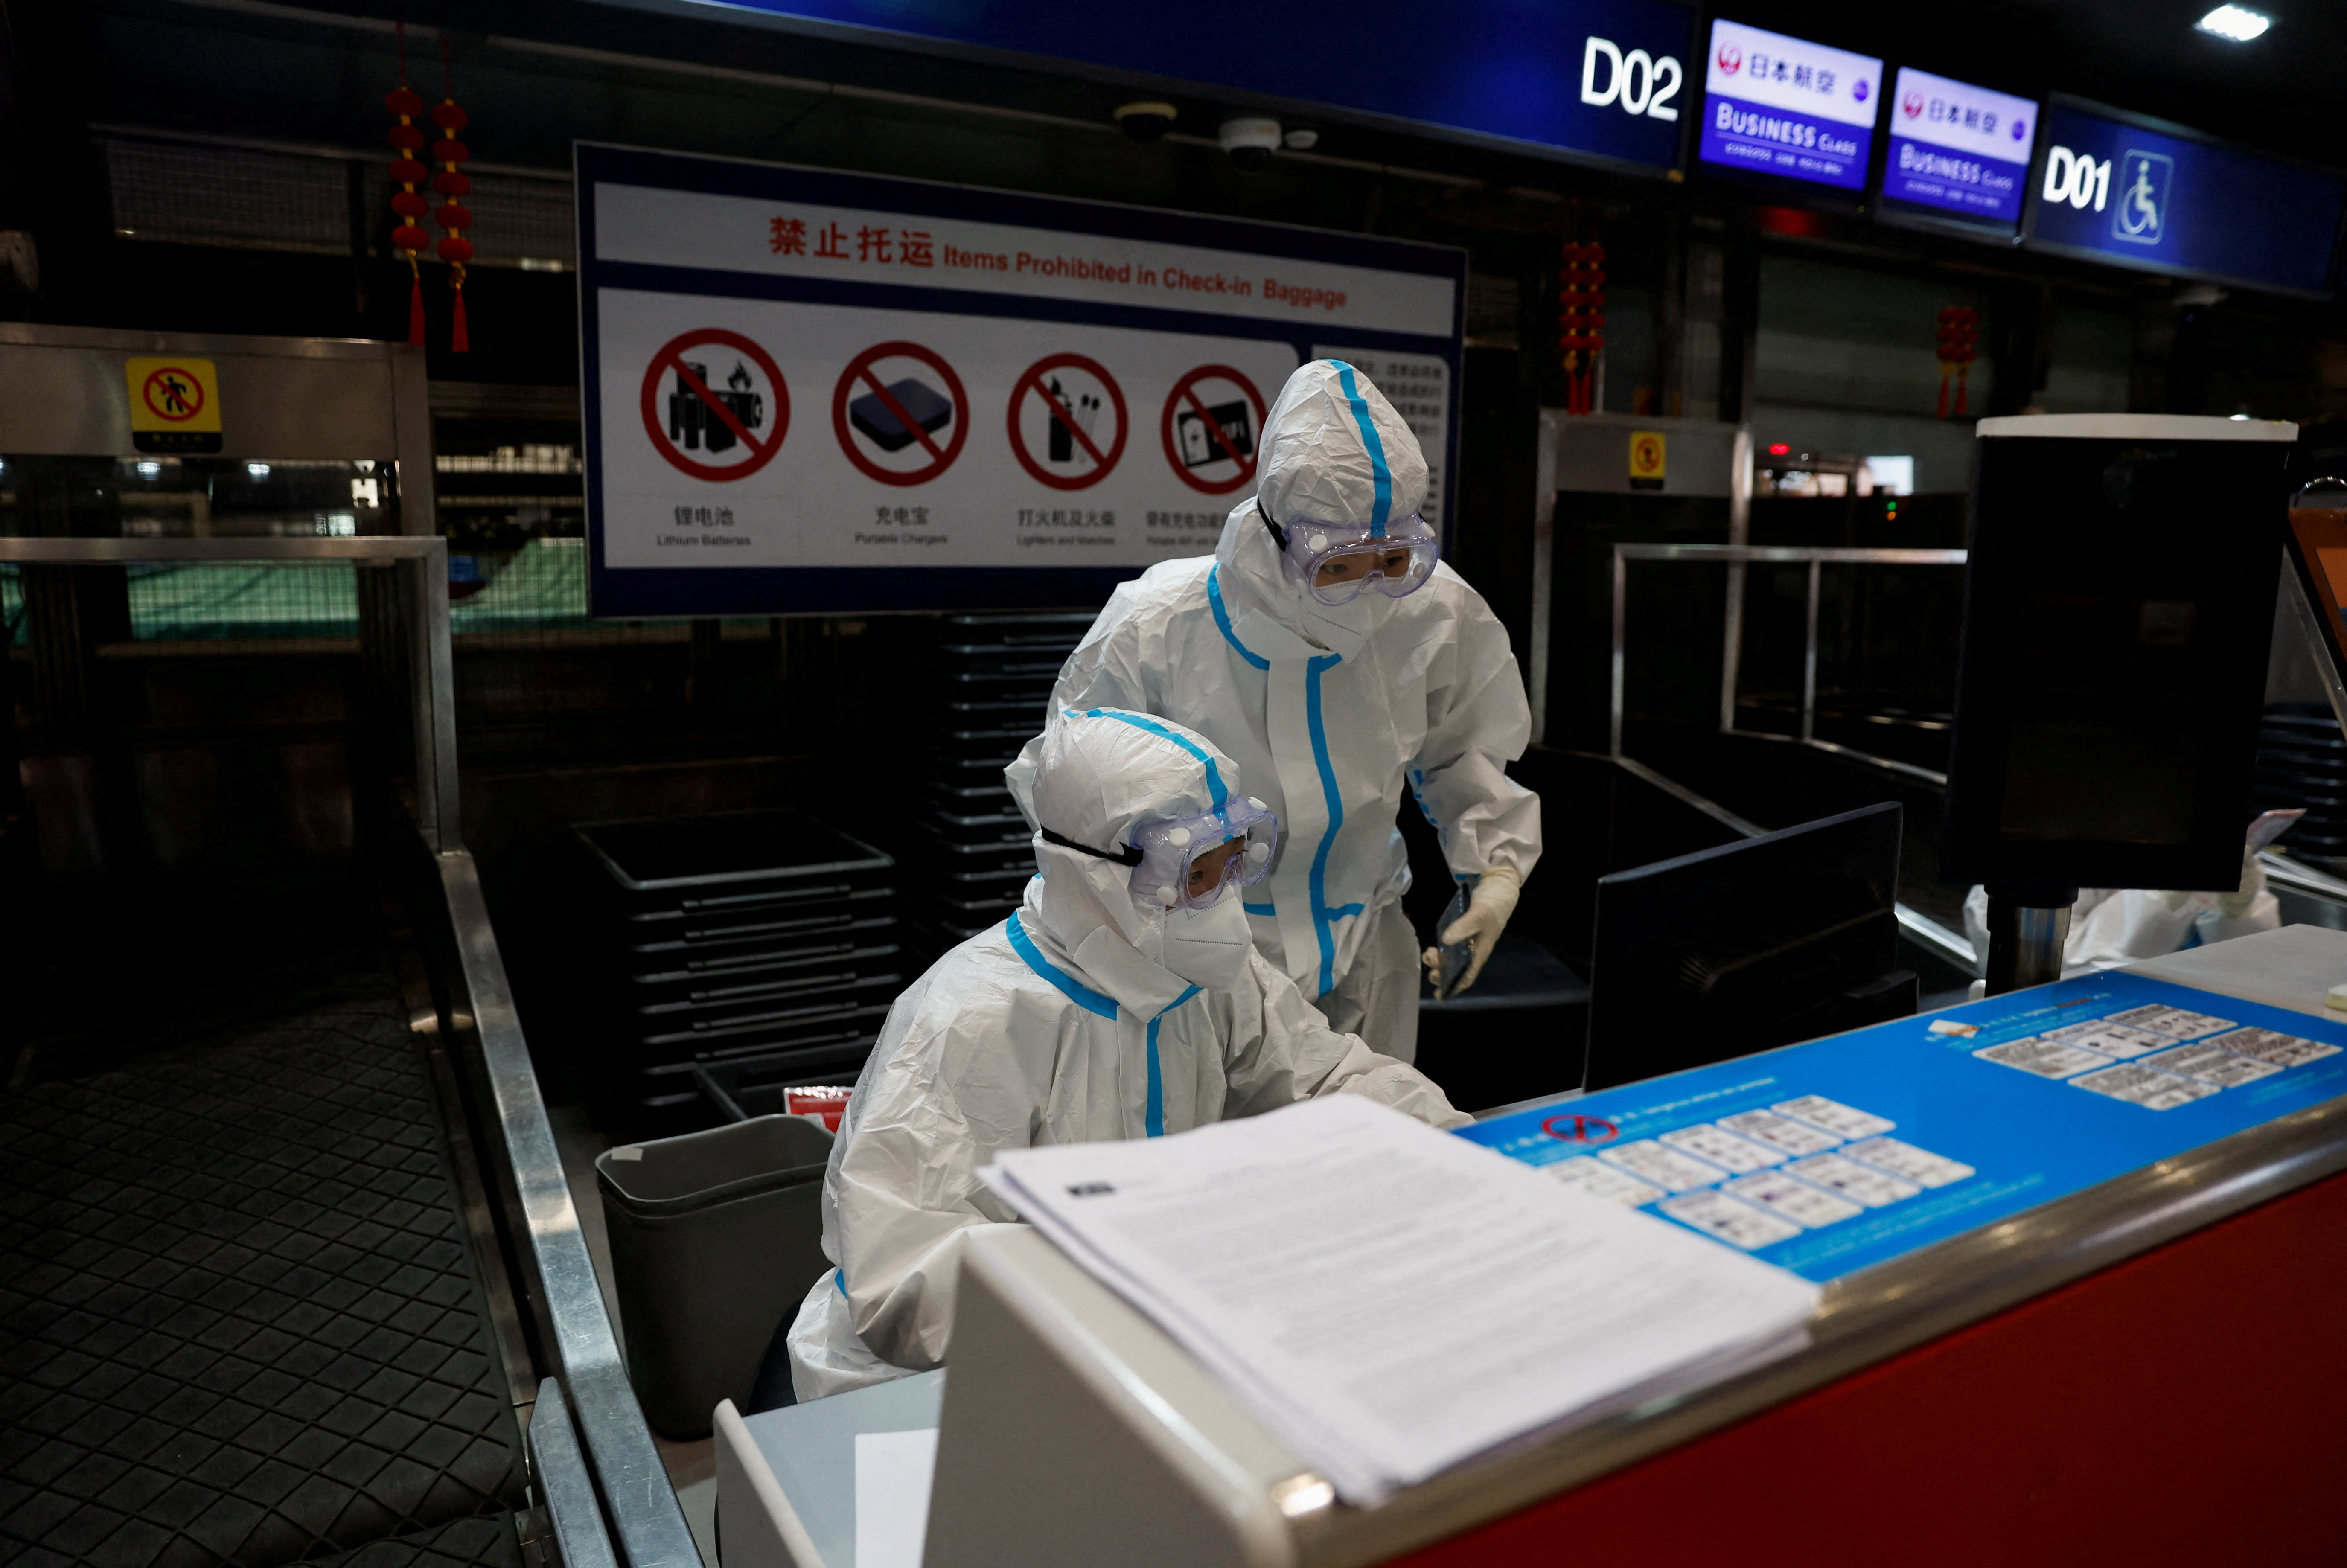 Airline staff wear personal protective equipment to protect against COVID-19, in Beijing